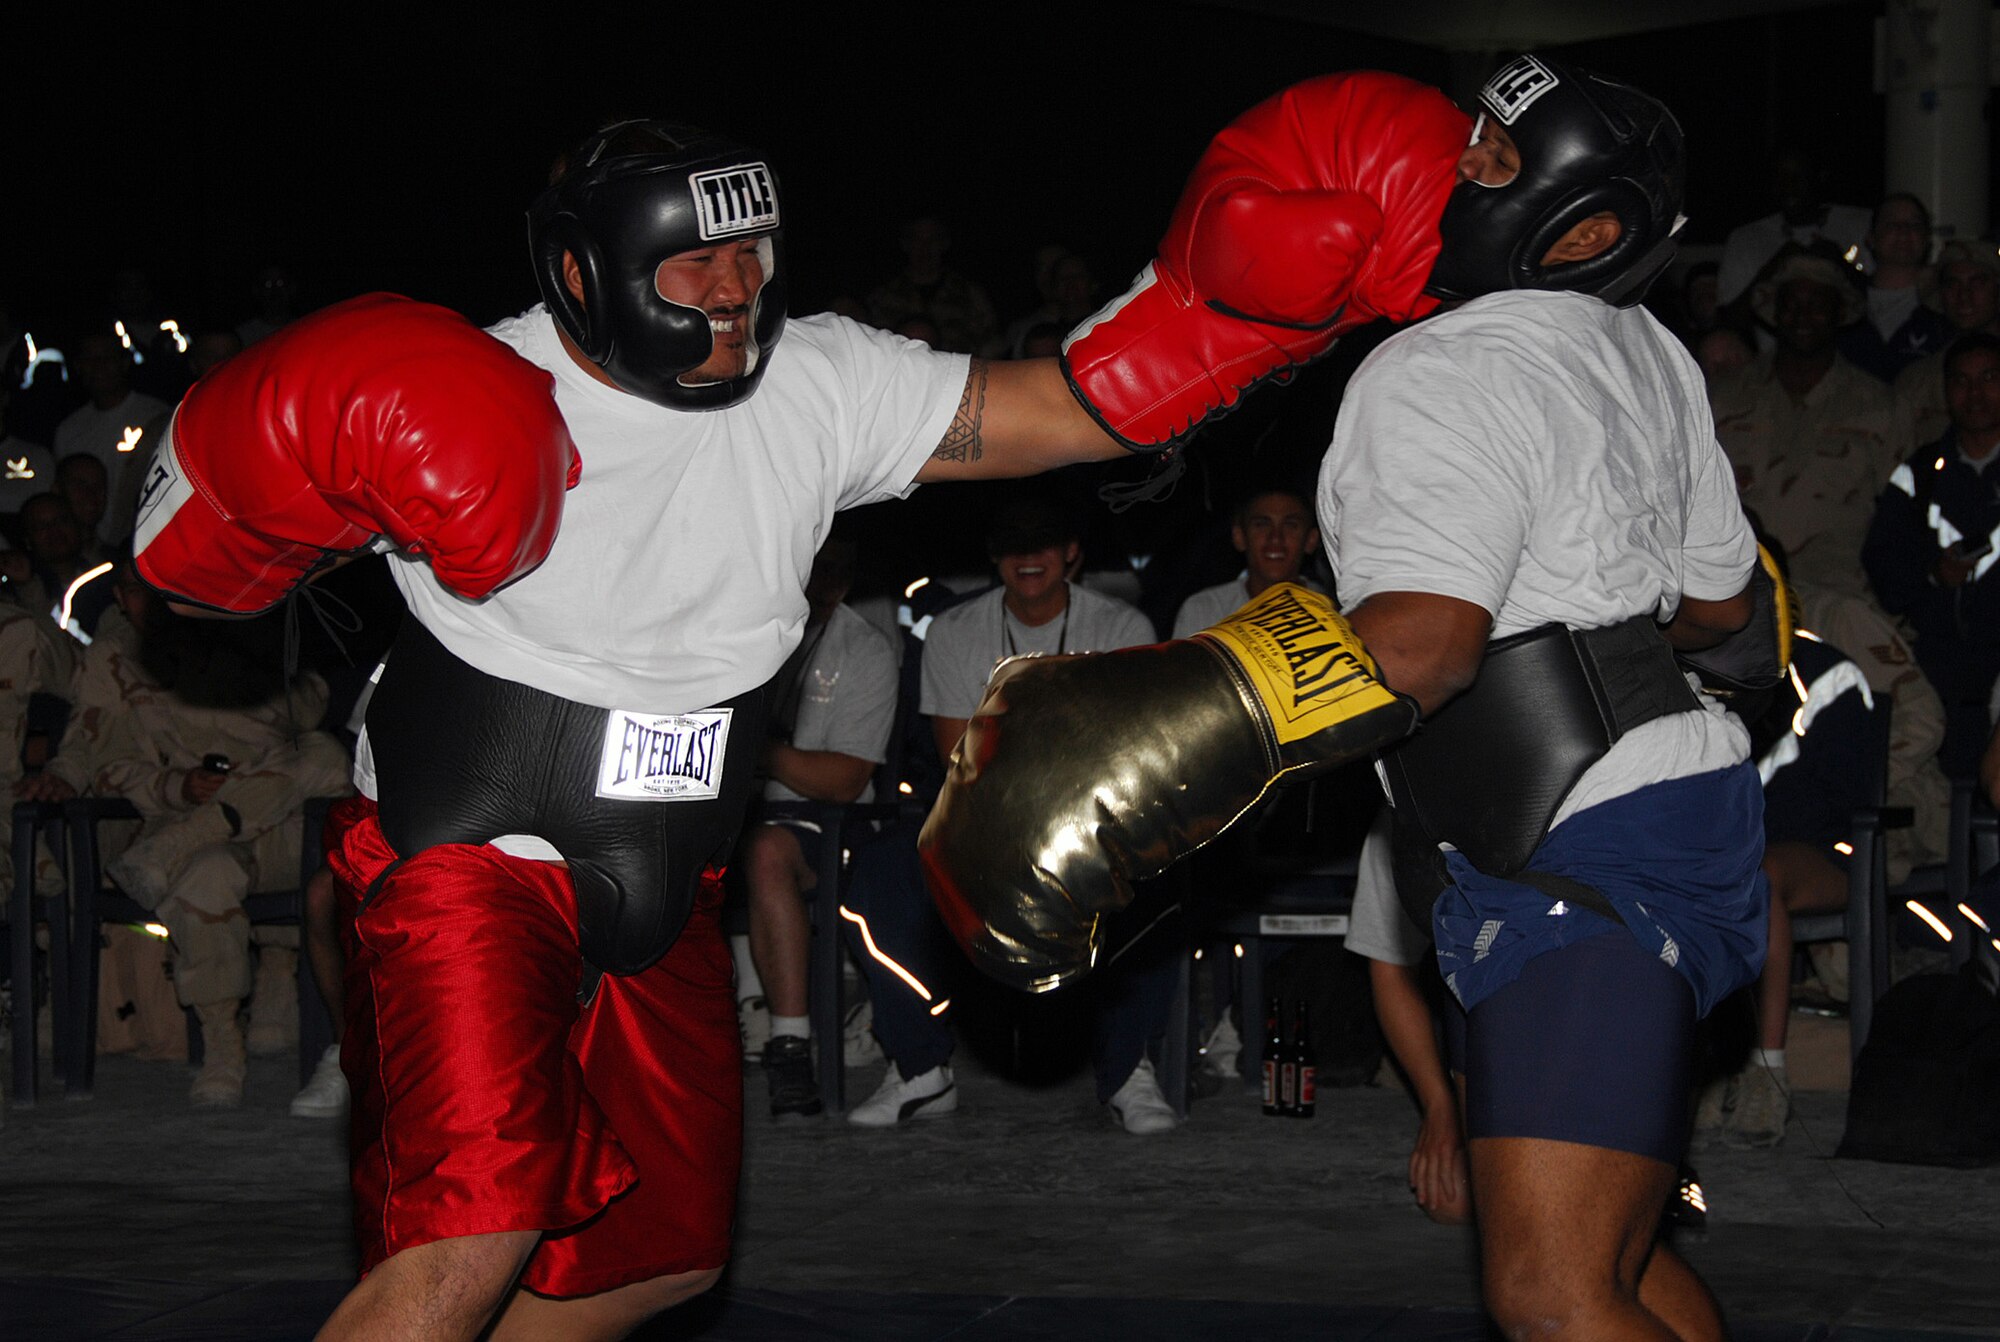 SOUTHWEST ASIA - The Big Kahuna delivers a left to the head of Staff Sgt. Leon Johnson, 379th Expeditionary Maintenance Squadron, in a boxing match hosted by the Desert 5 at a Southwest Asia air base Dec. 14. (U. S. Air Force photo/Staff Sgt. Douglas Olsen)